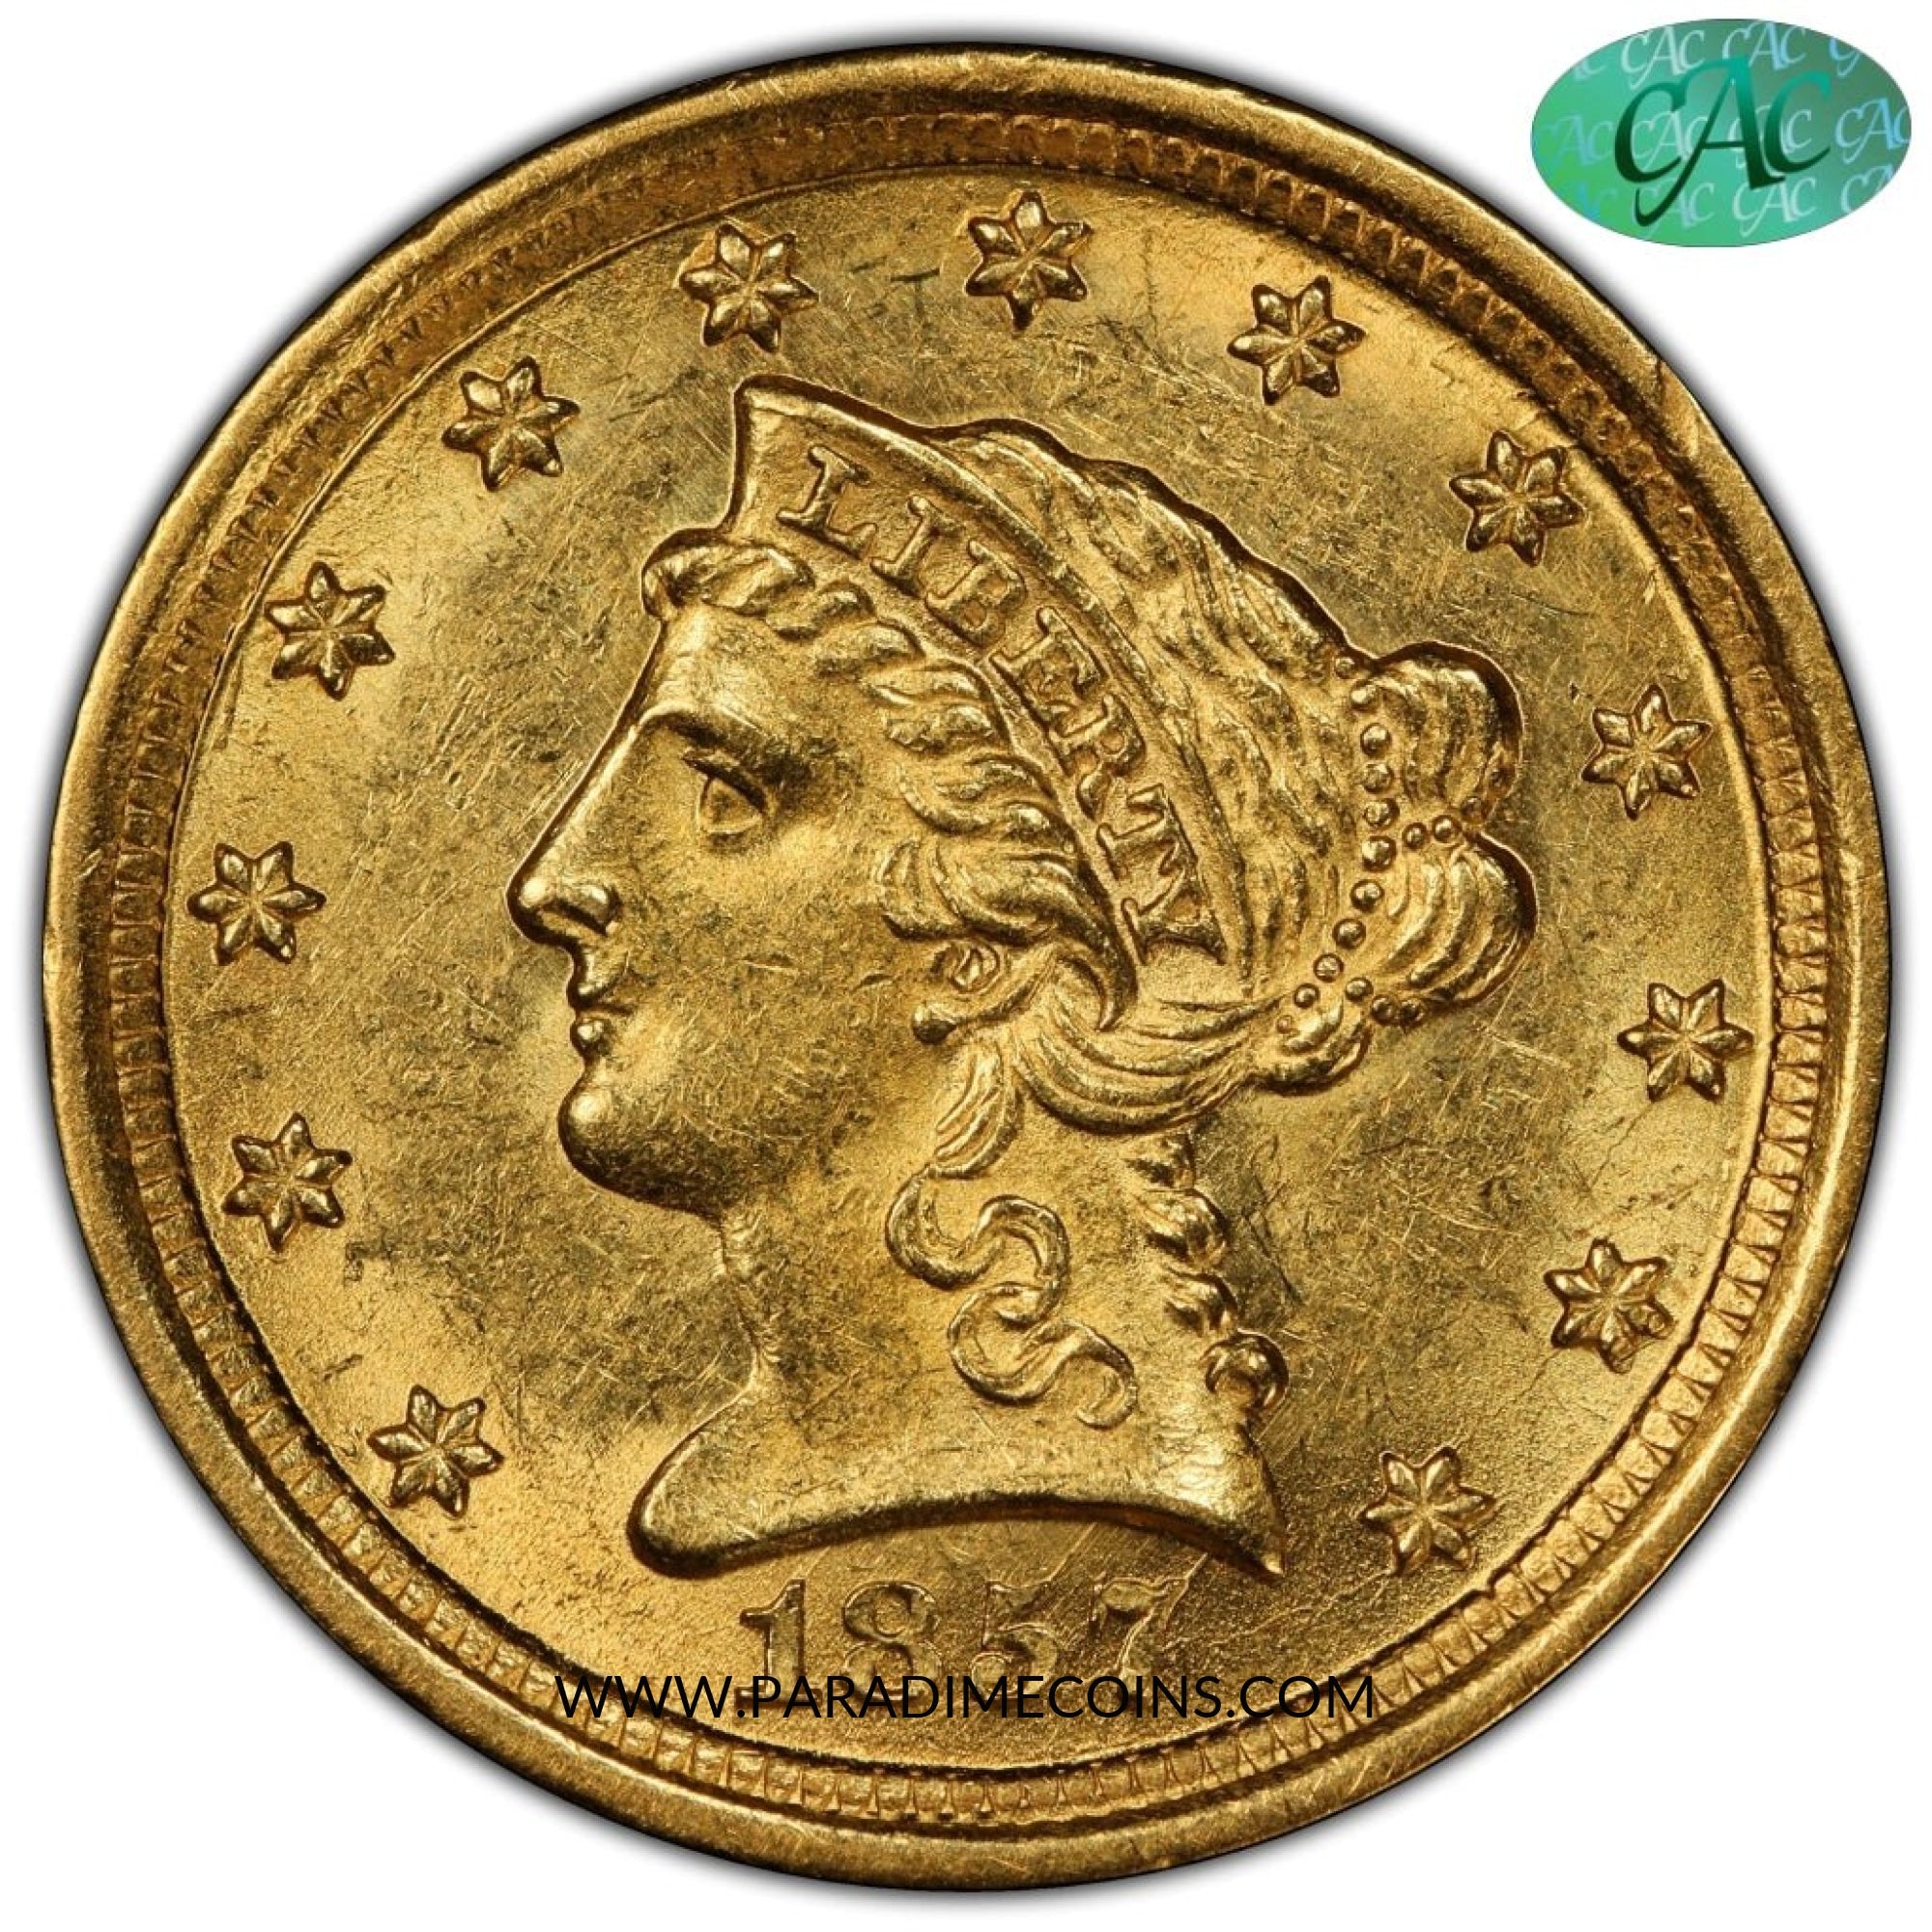 1857-D $2.5 MS61 PCGS CAC - Paradime Coins | PCGS NGC CACG CAC Rare US Numismatic Coins For Sale